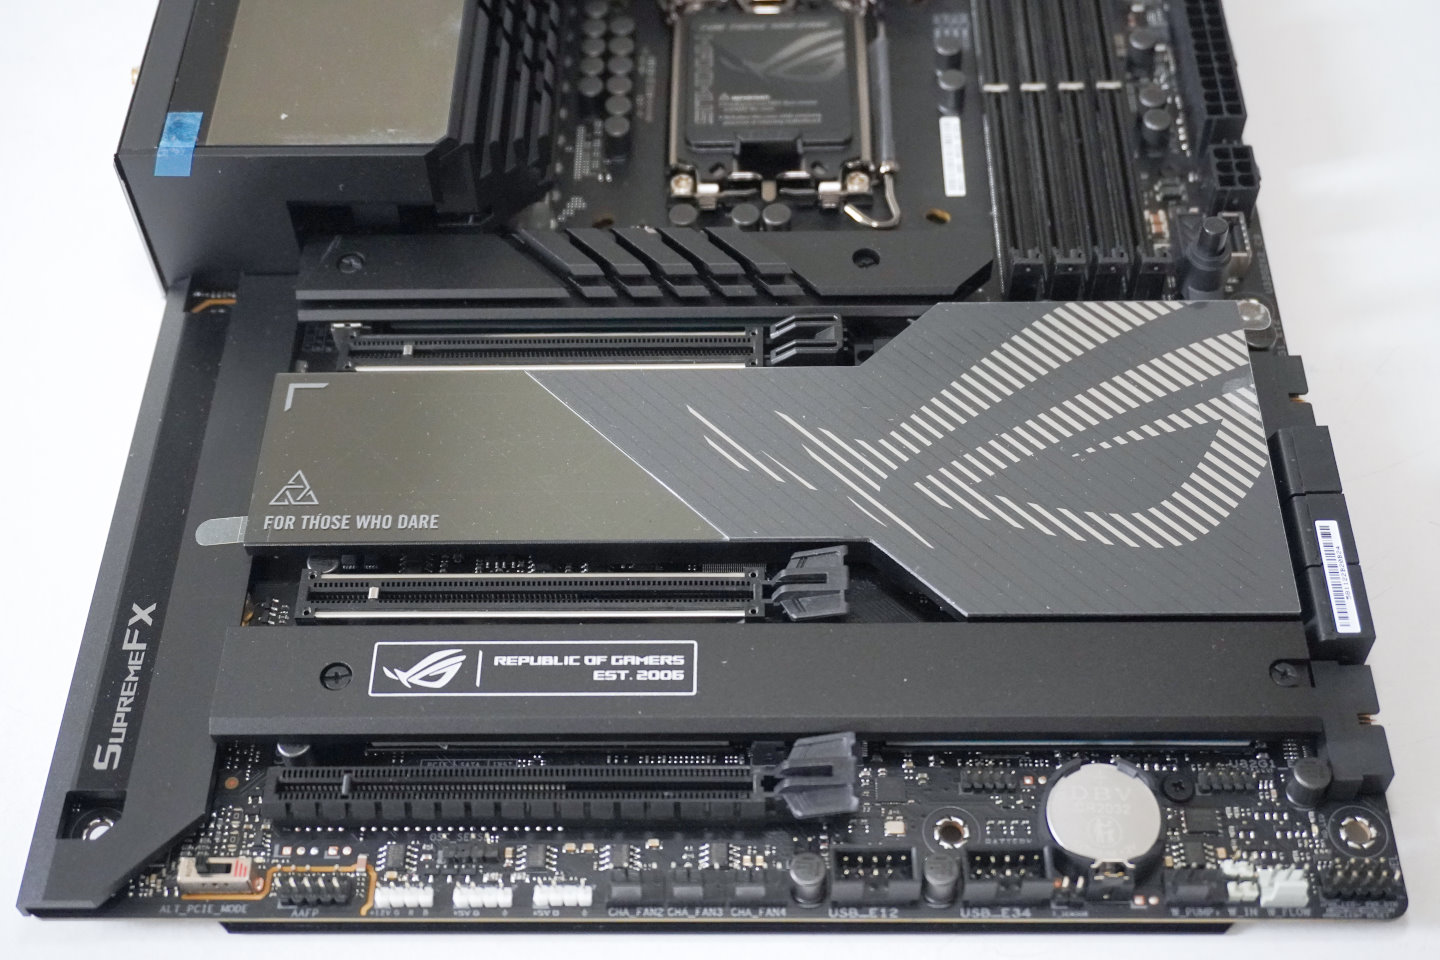 The motherboard has three built-in M.2 slots, all of which support PCIe Gen 4x4 transmission mode.